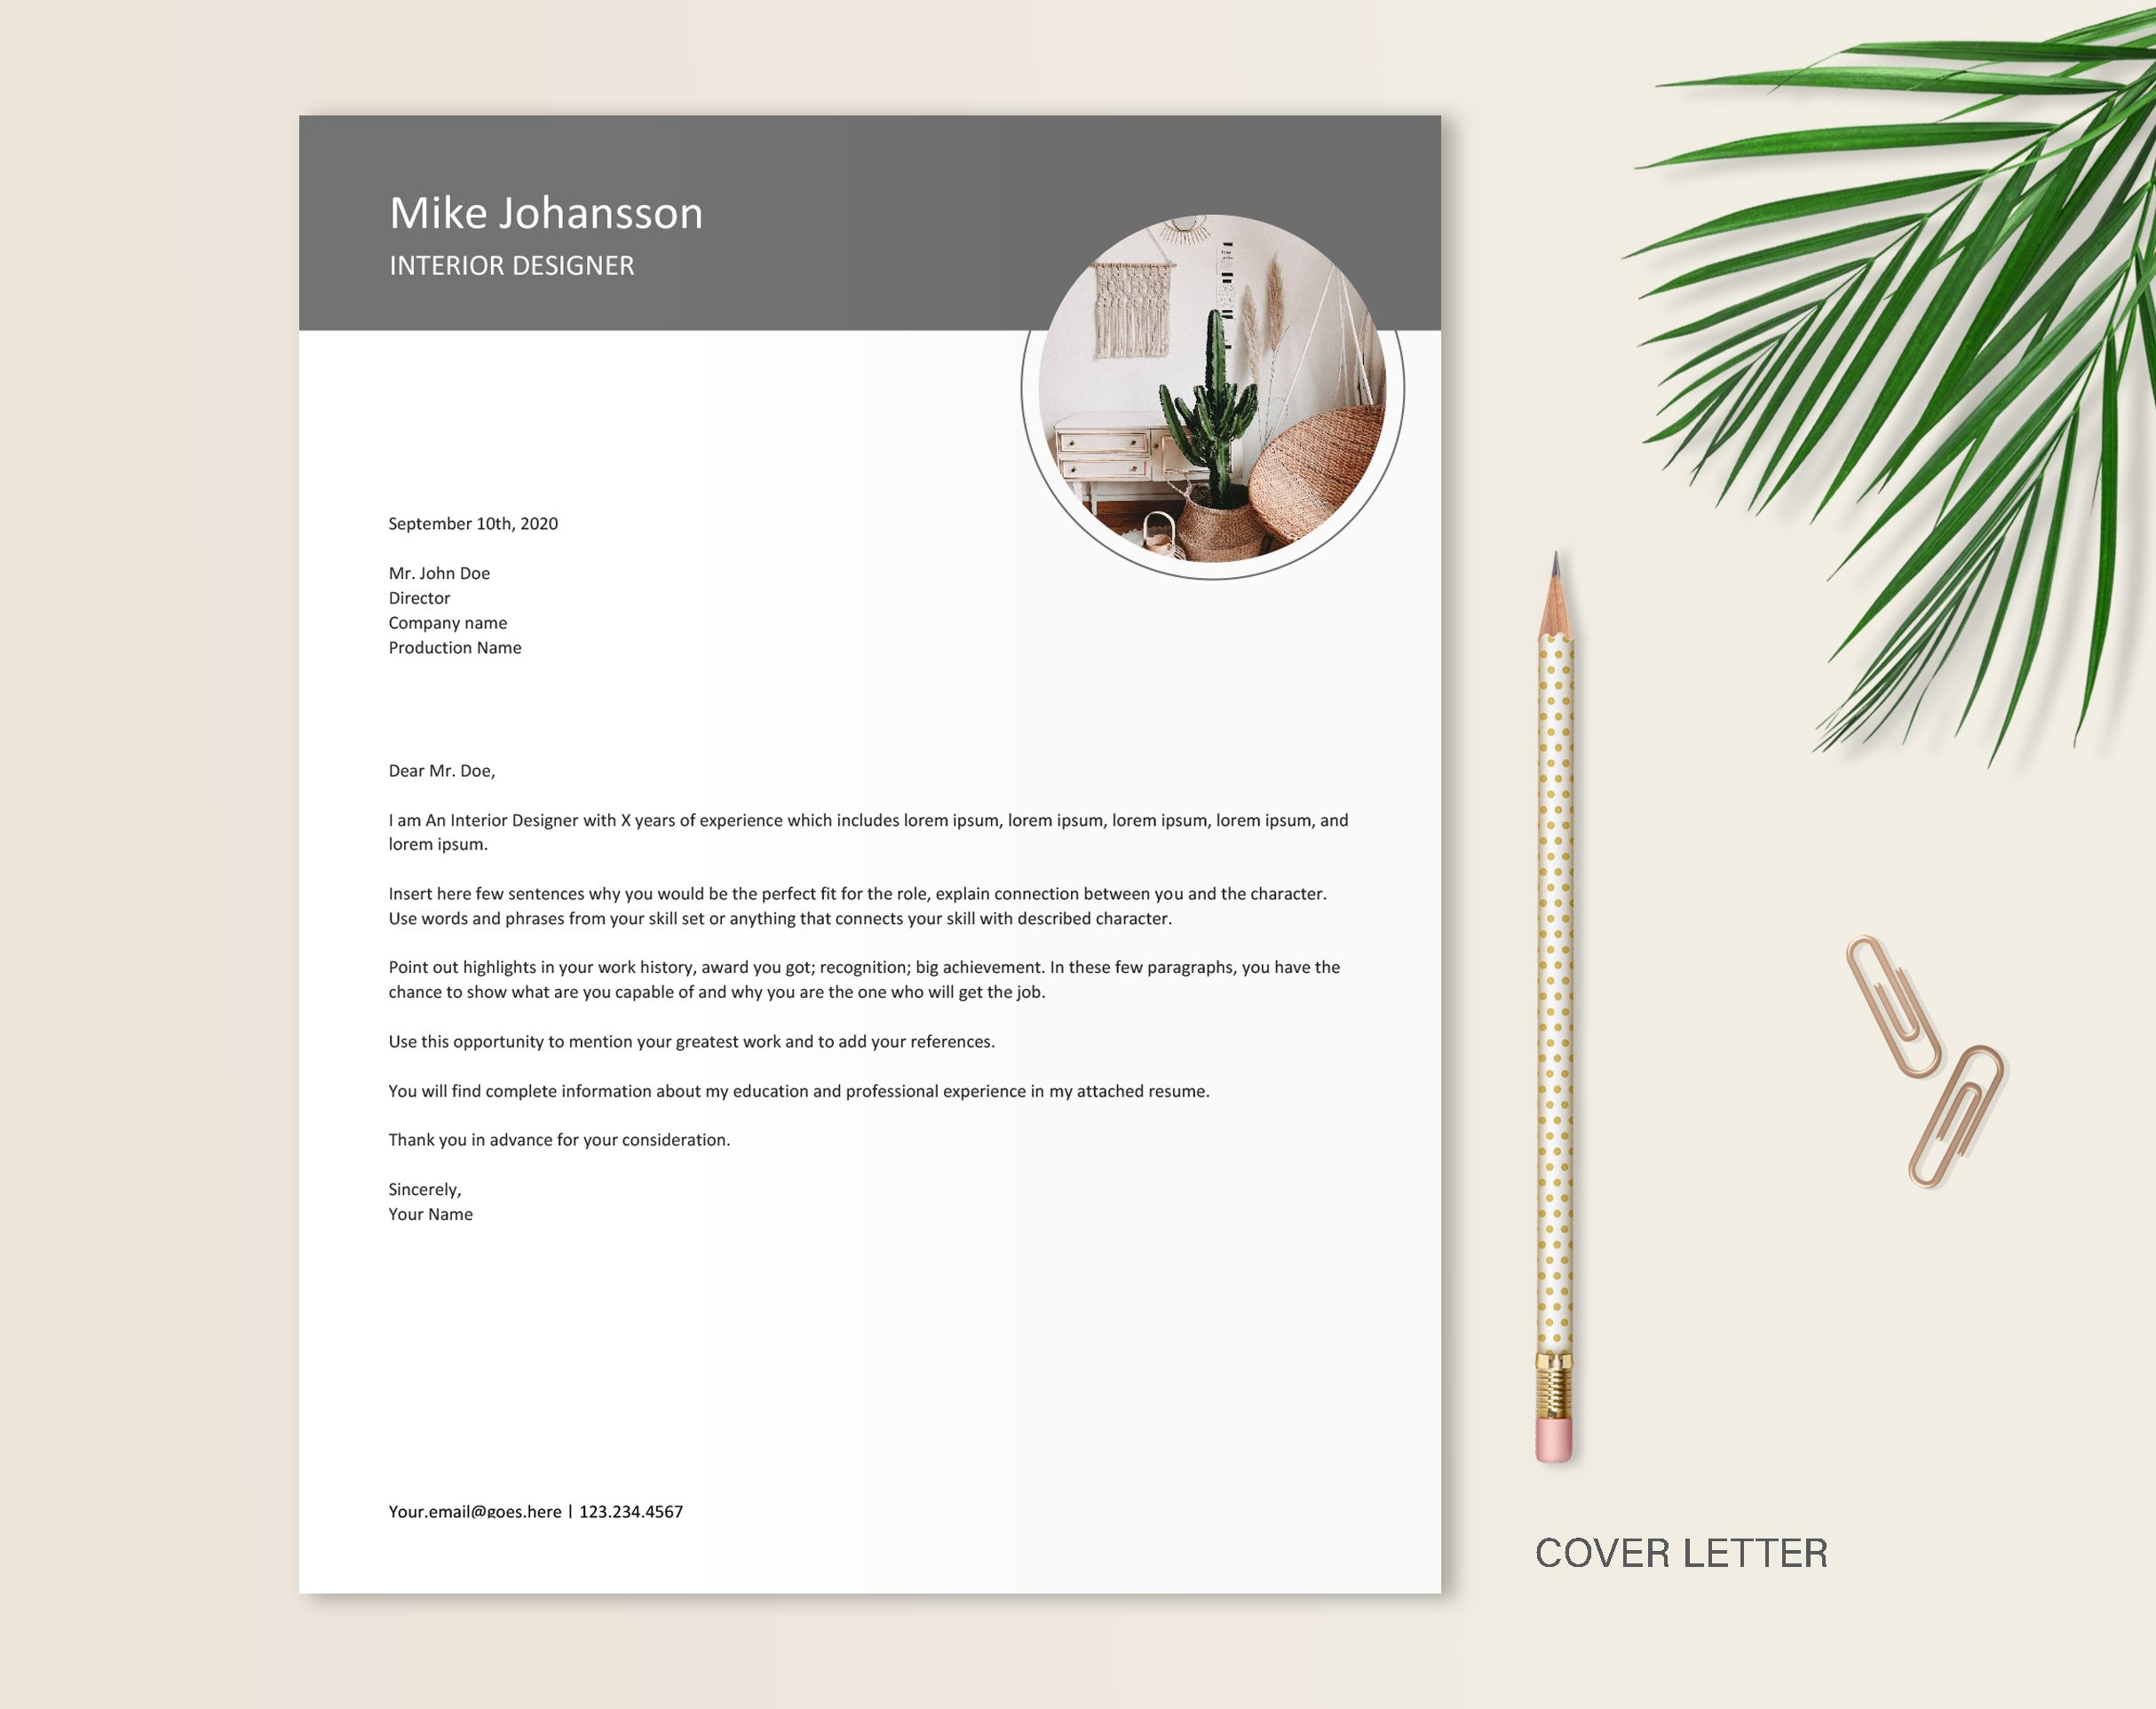 Letterhead with a plant next to it.